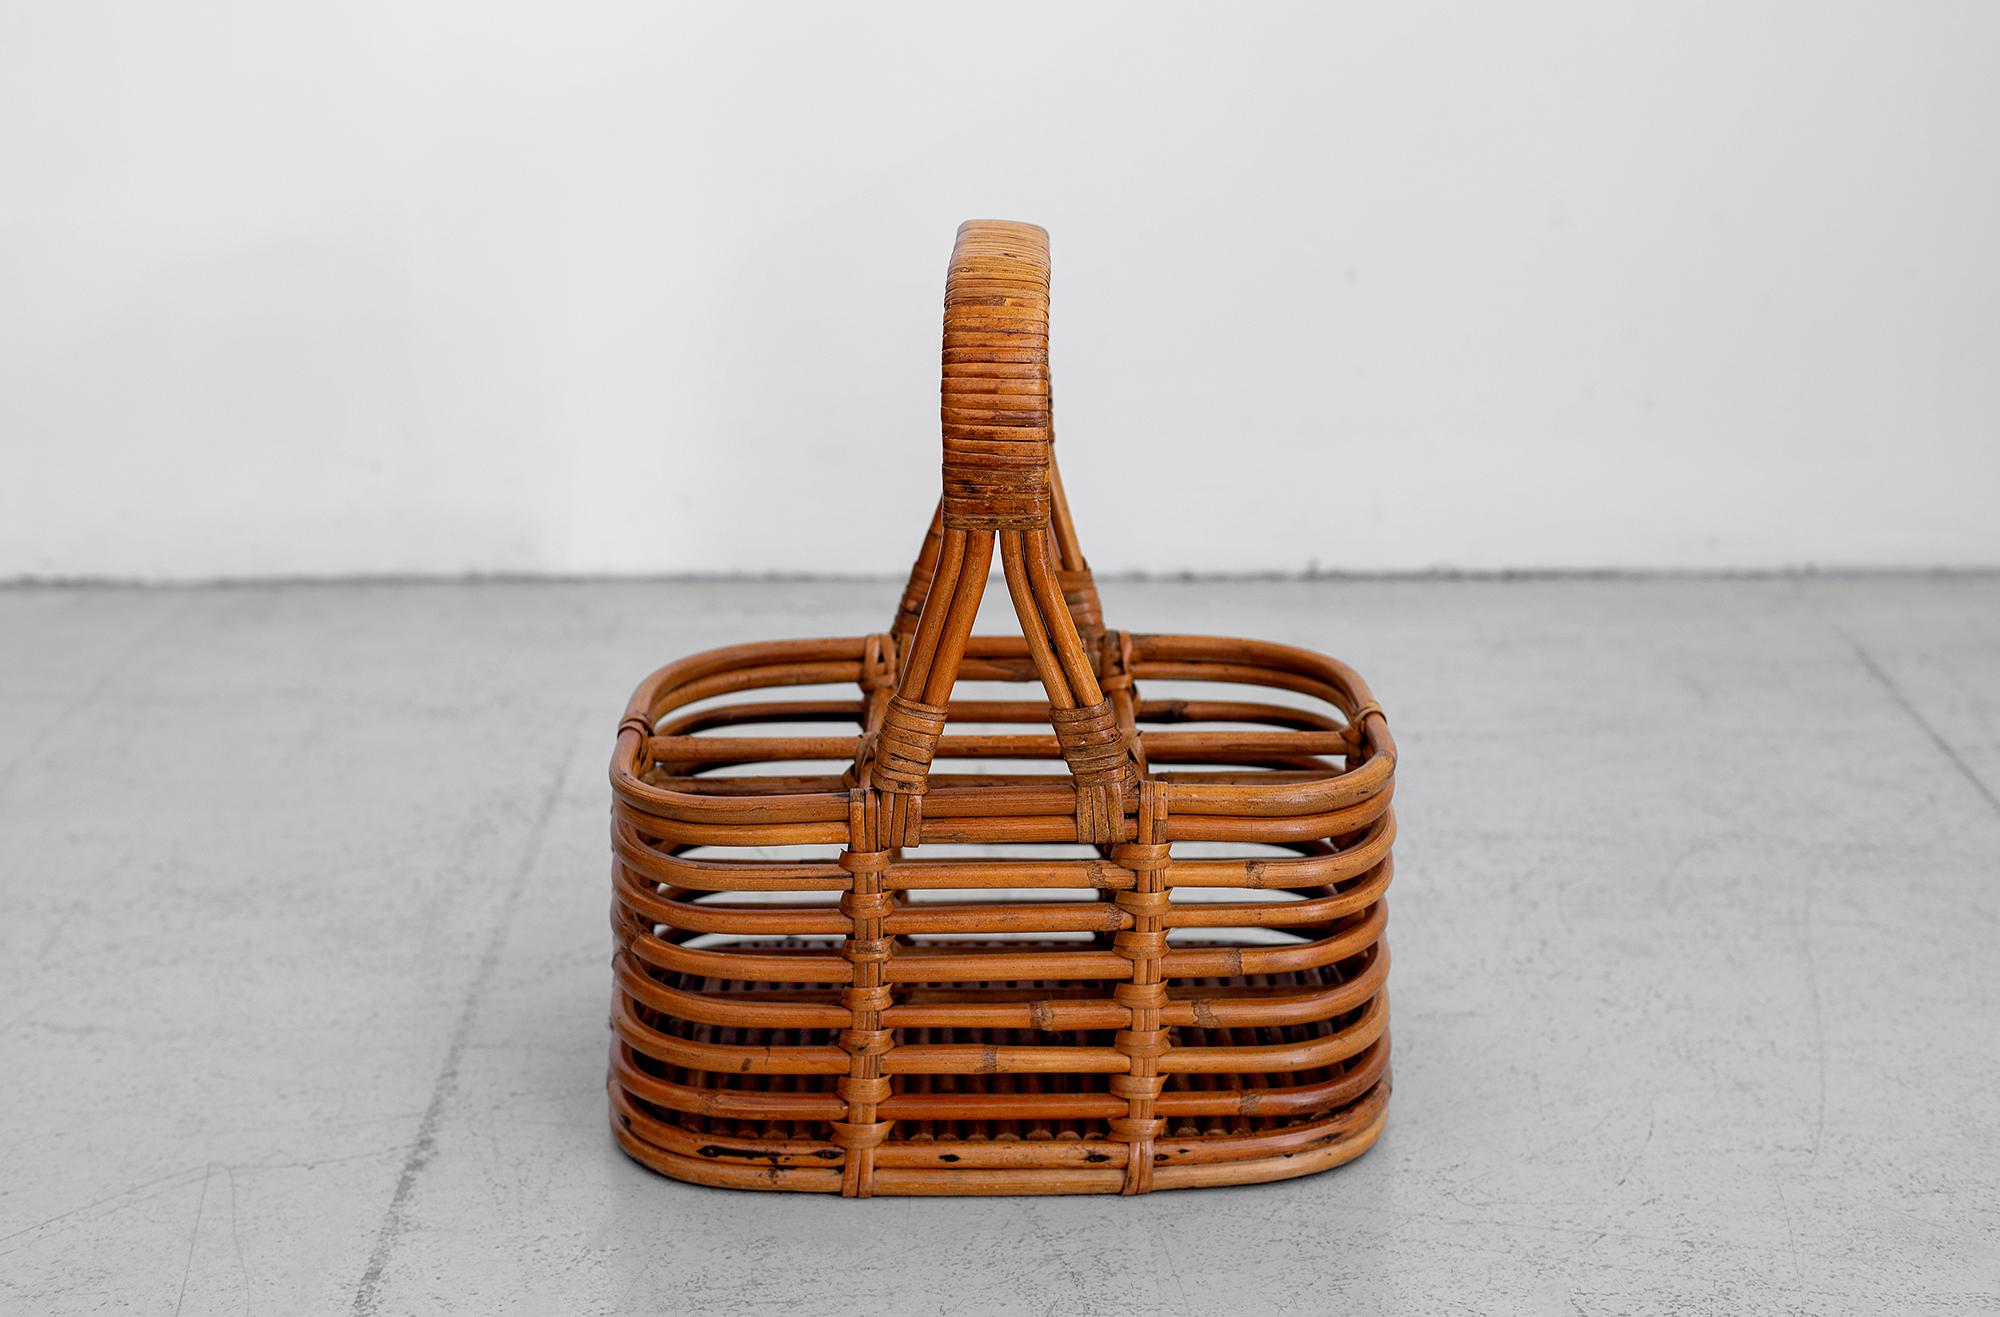 French bent bamboo and wicker wine or bottle holder.
Great addition to any bar!